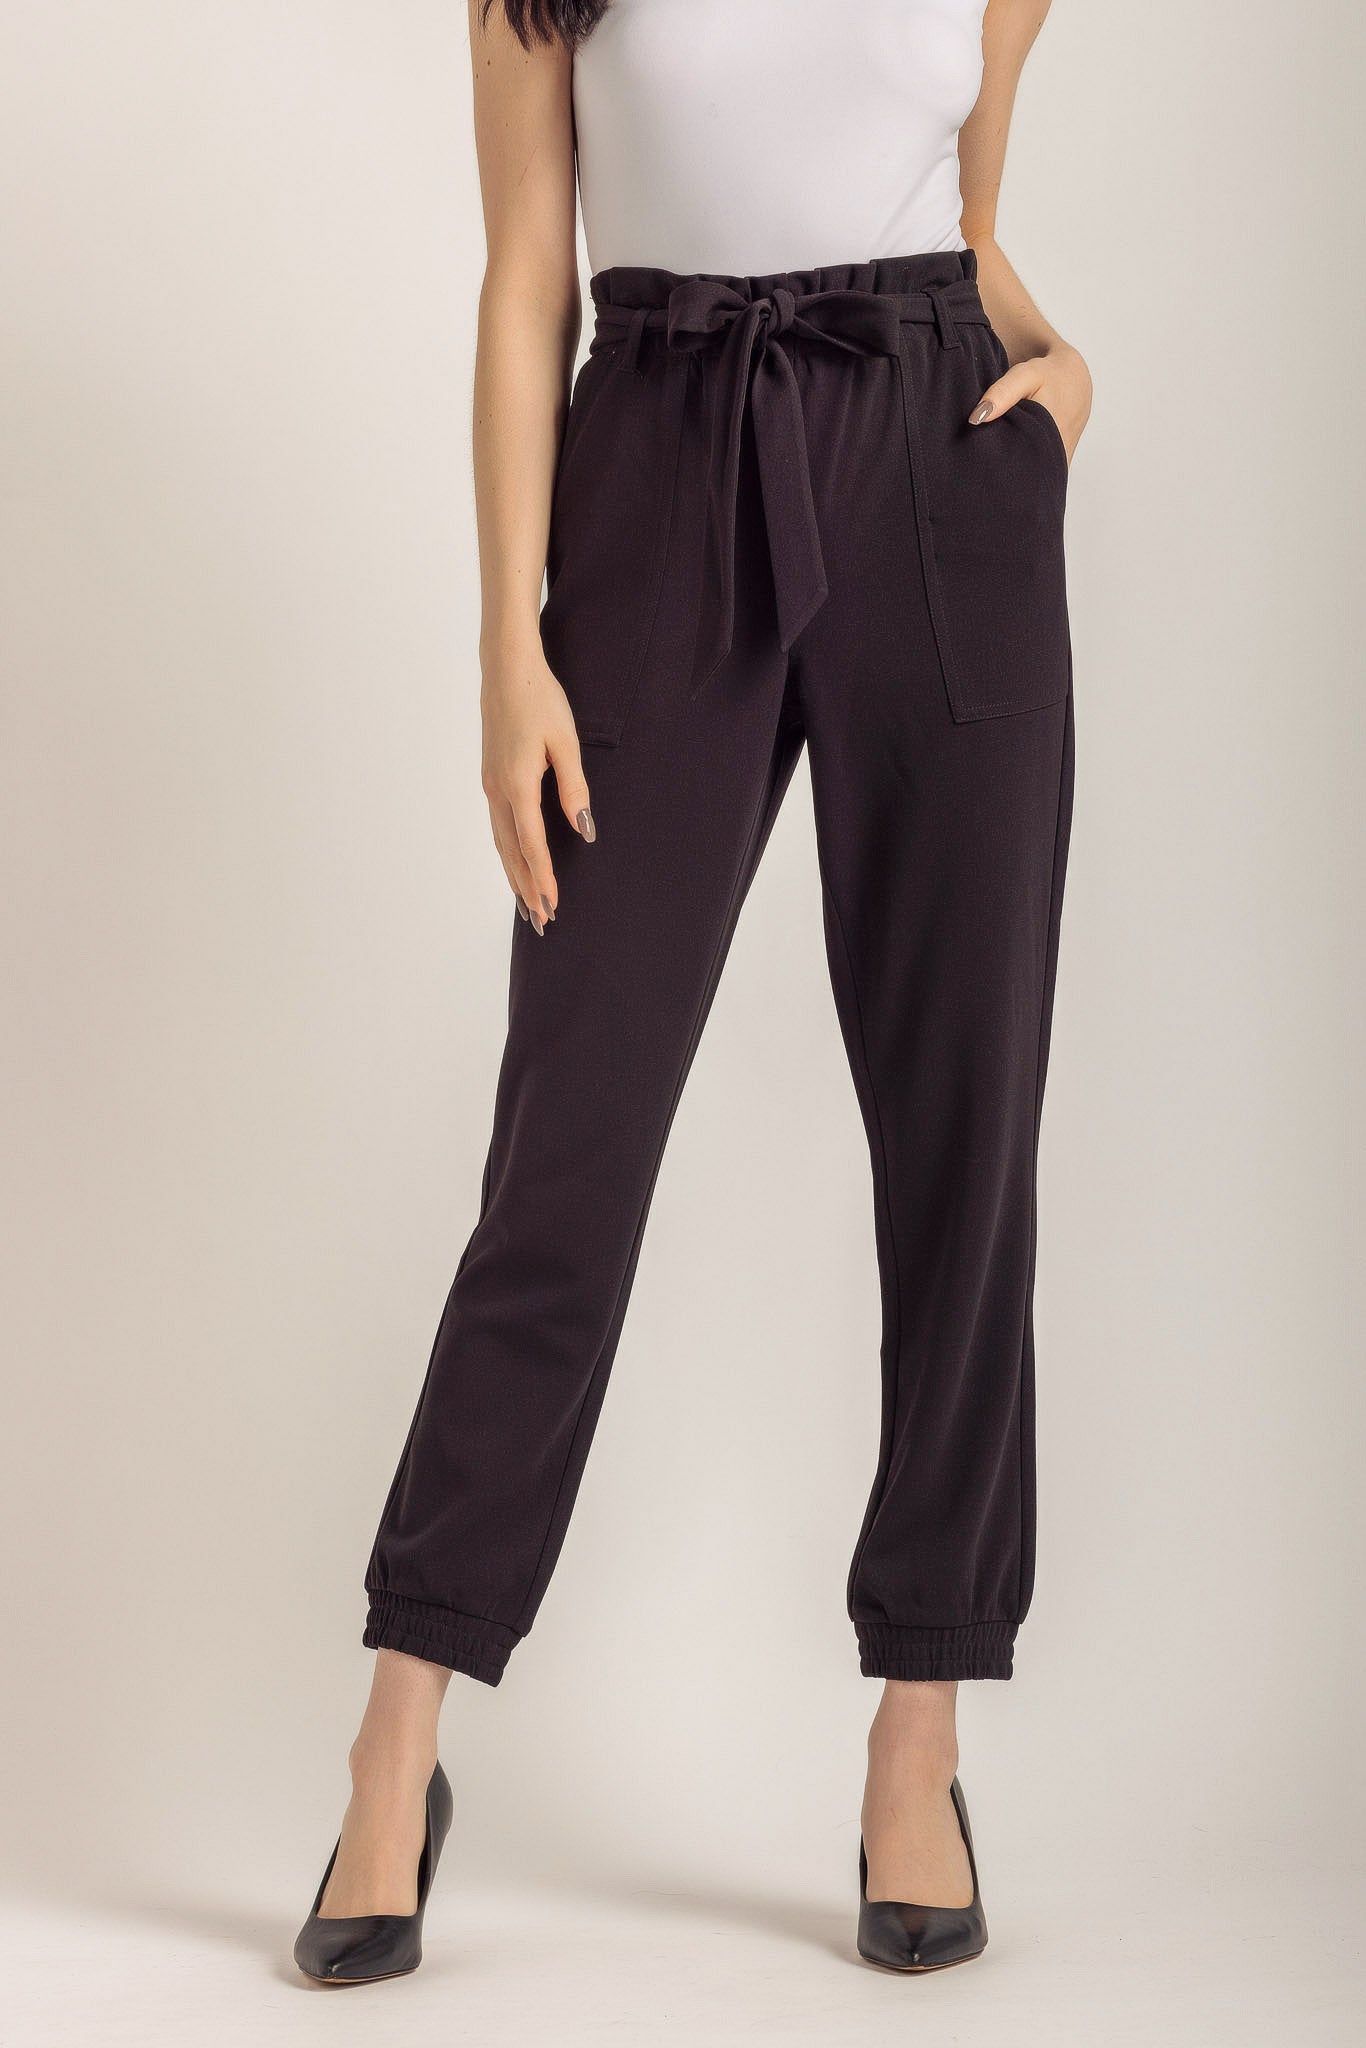 Eclipse High-Waisted 28 Lined Shadow Stripe Jogger